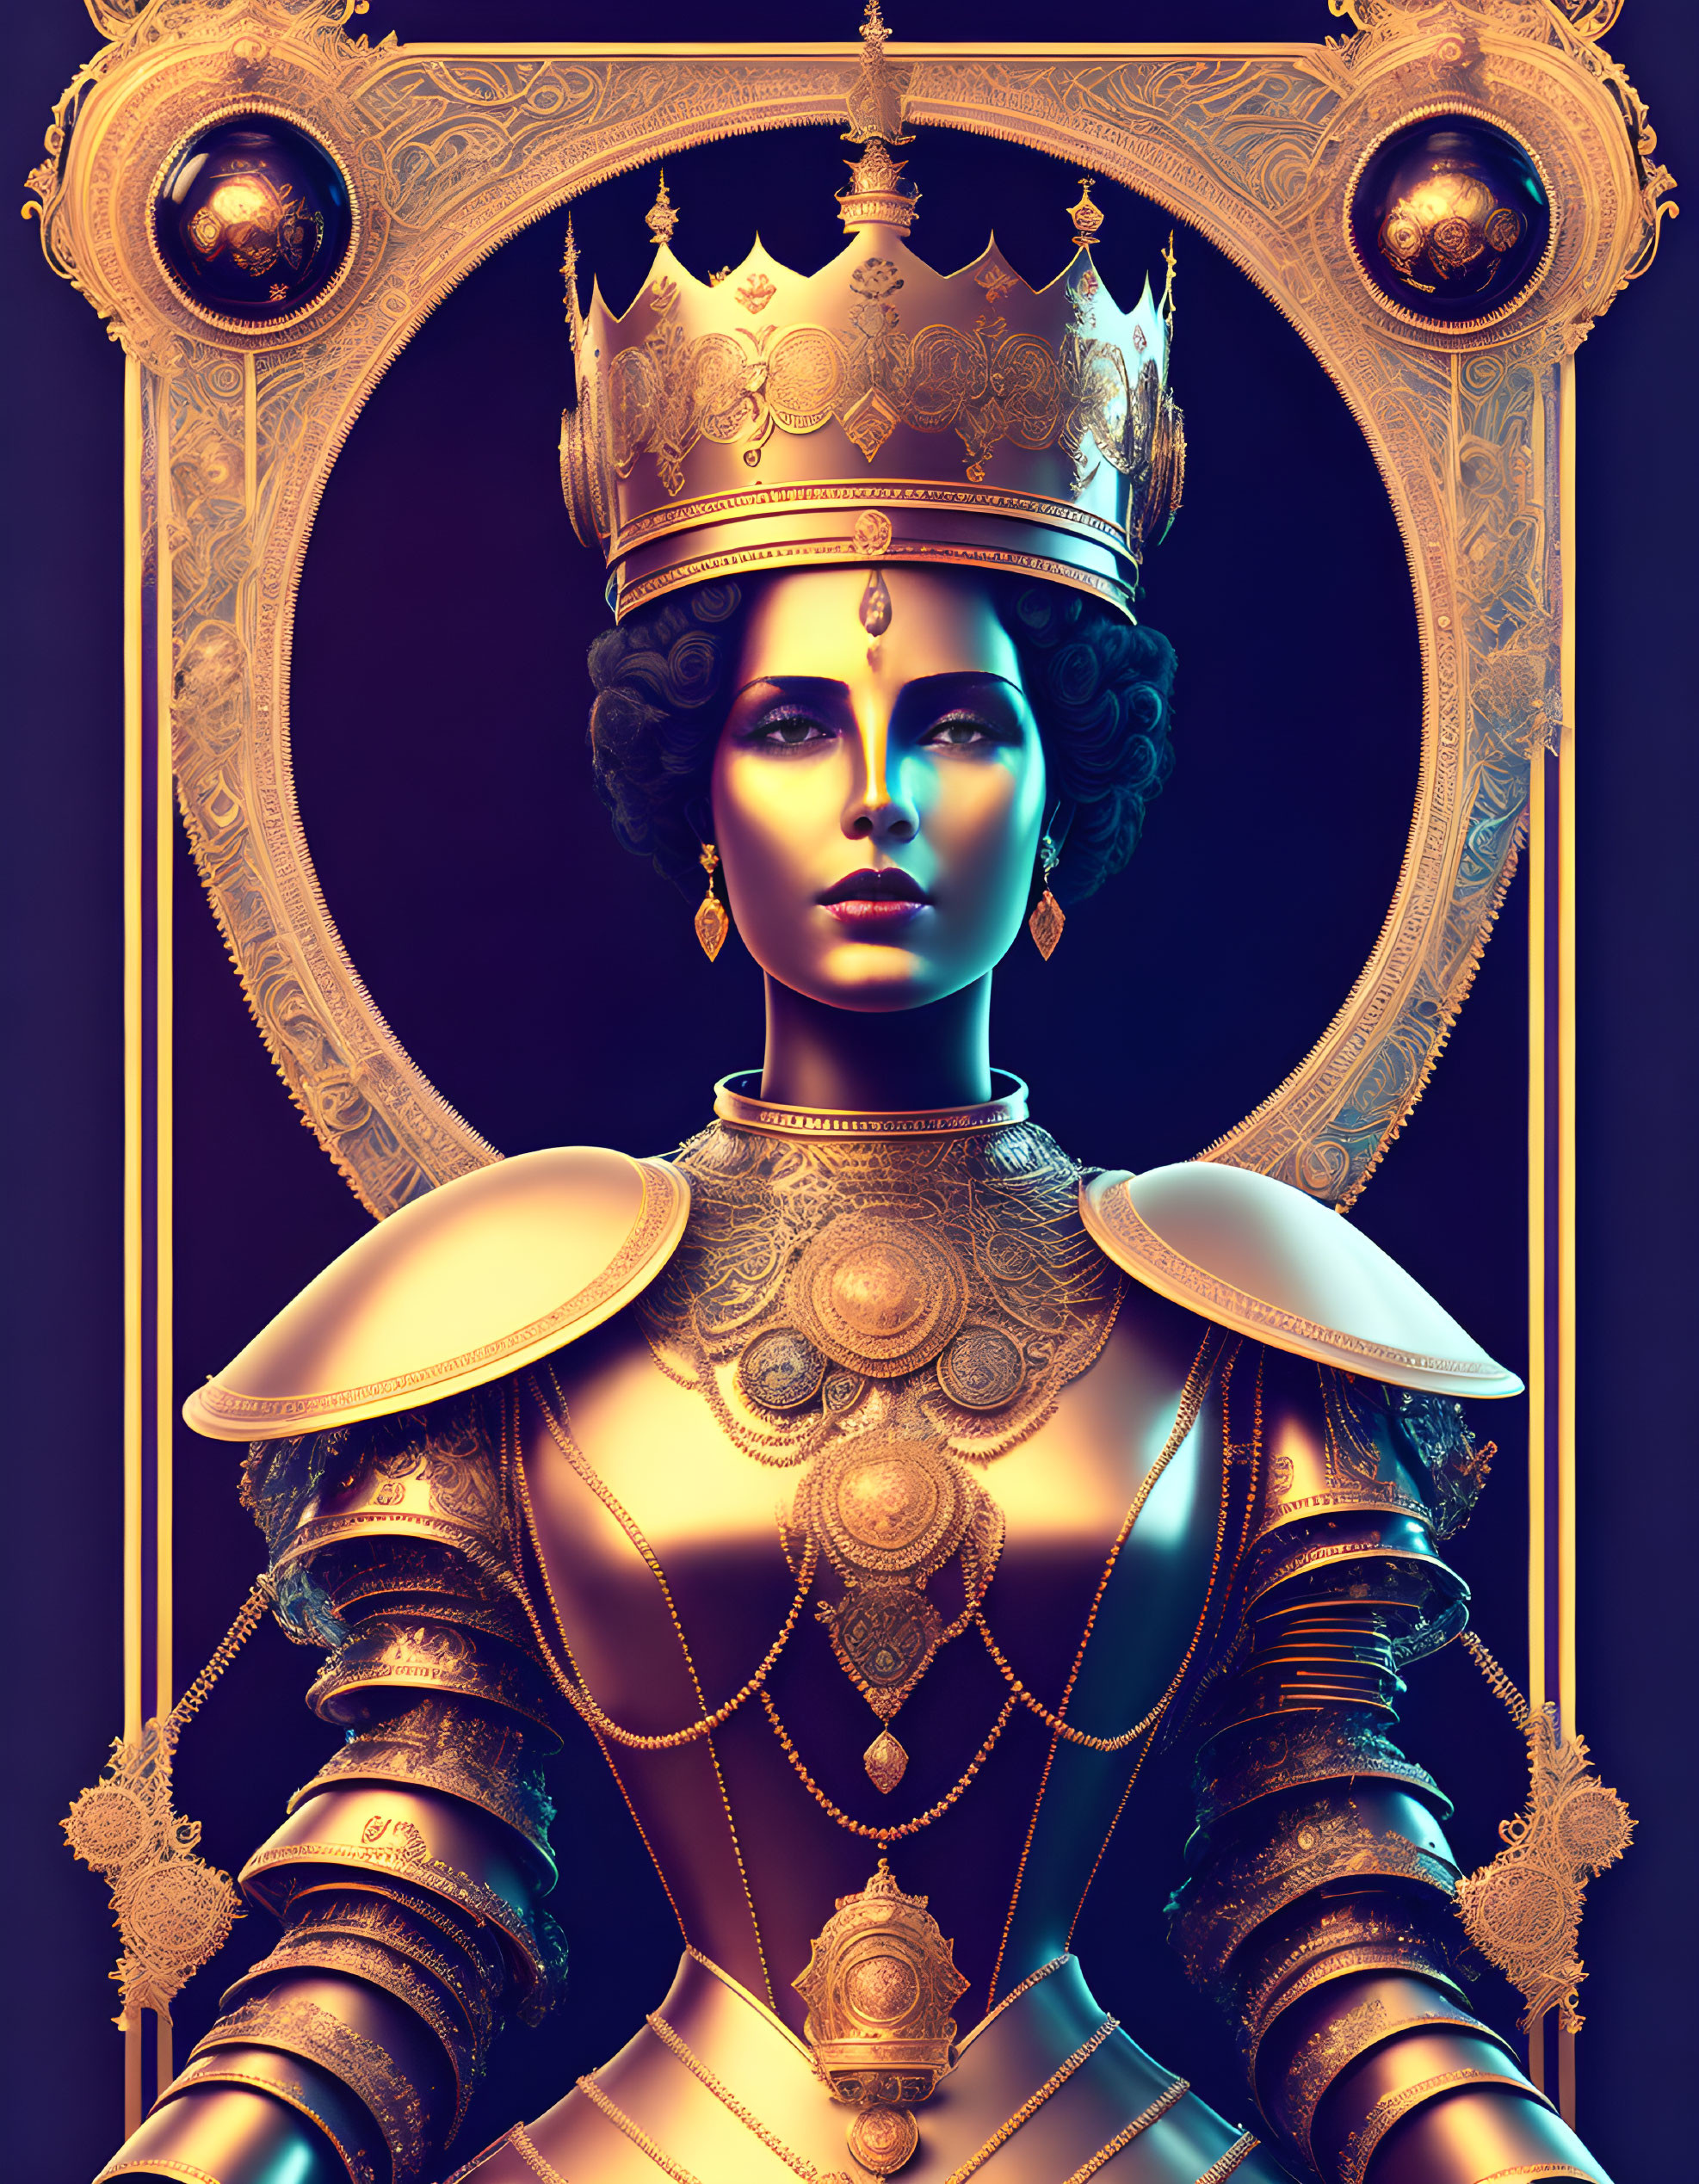 Regal figure with crown and ornate attire in digital artwork